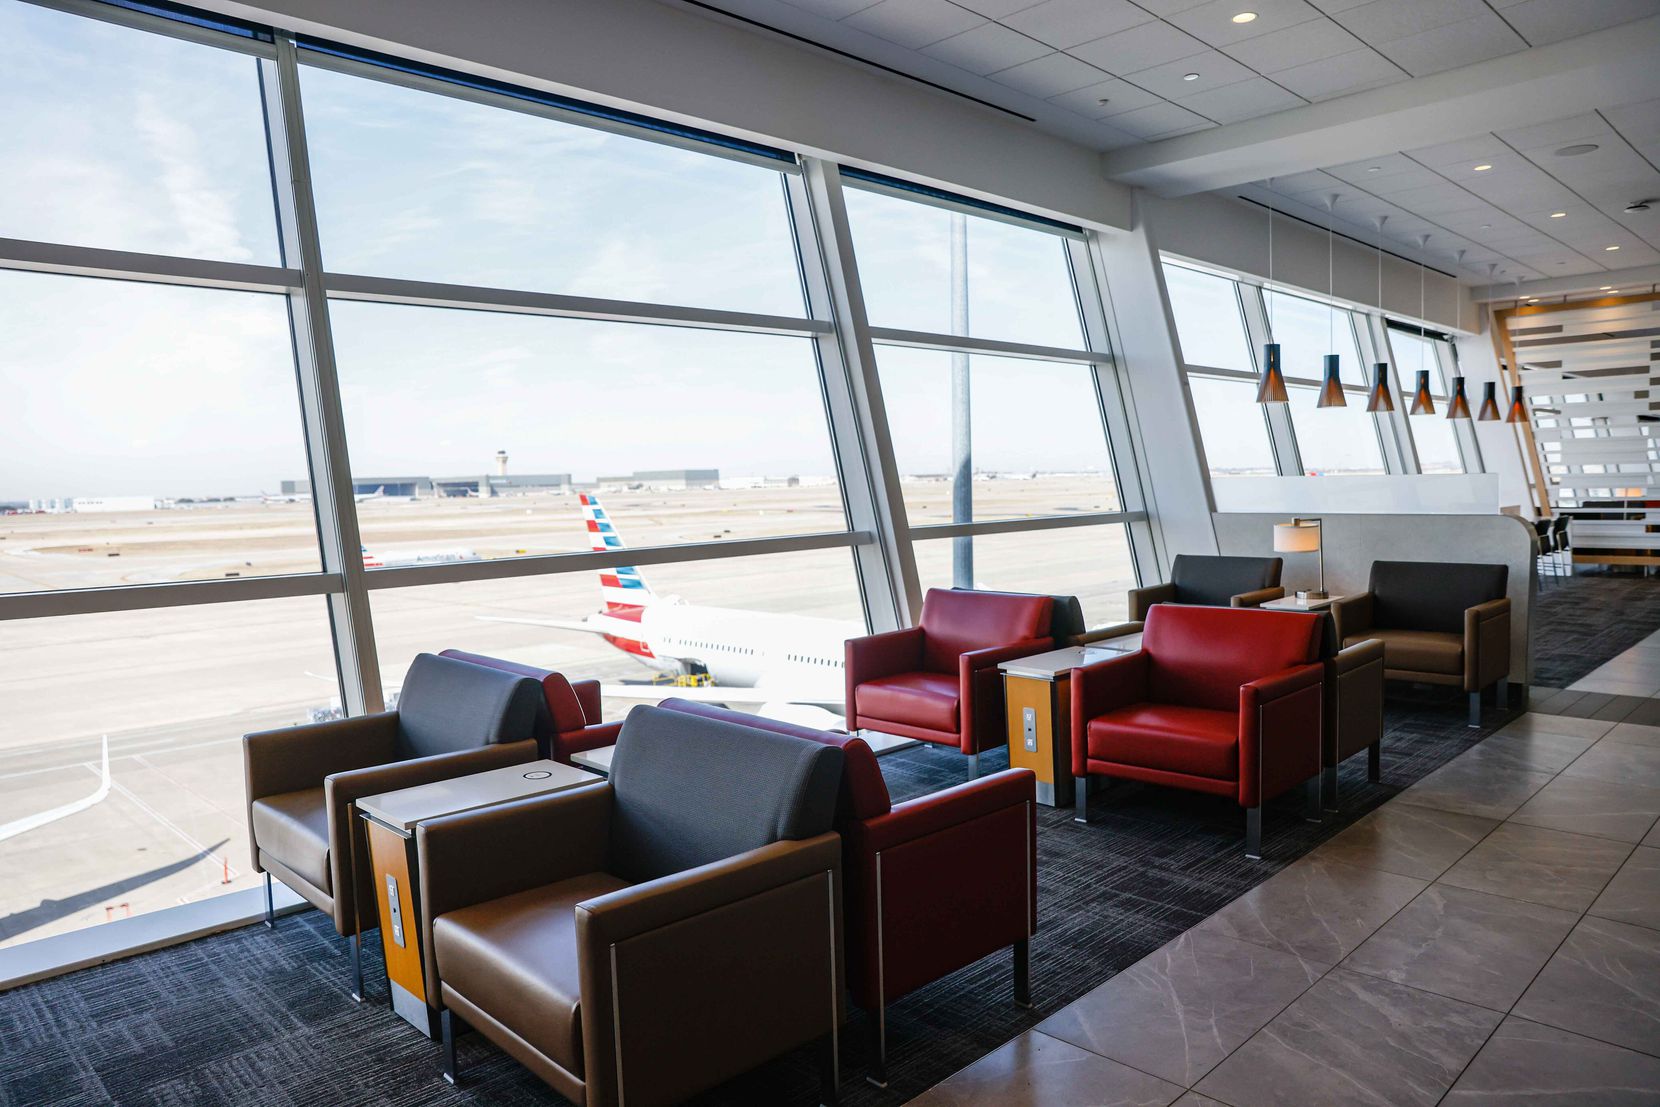 American Airlines' Flagship Lounge in Terminal D at DFW Airport on March 1.